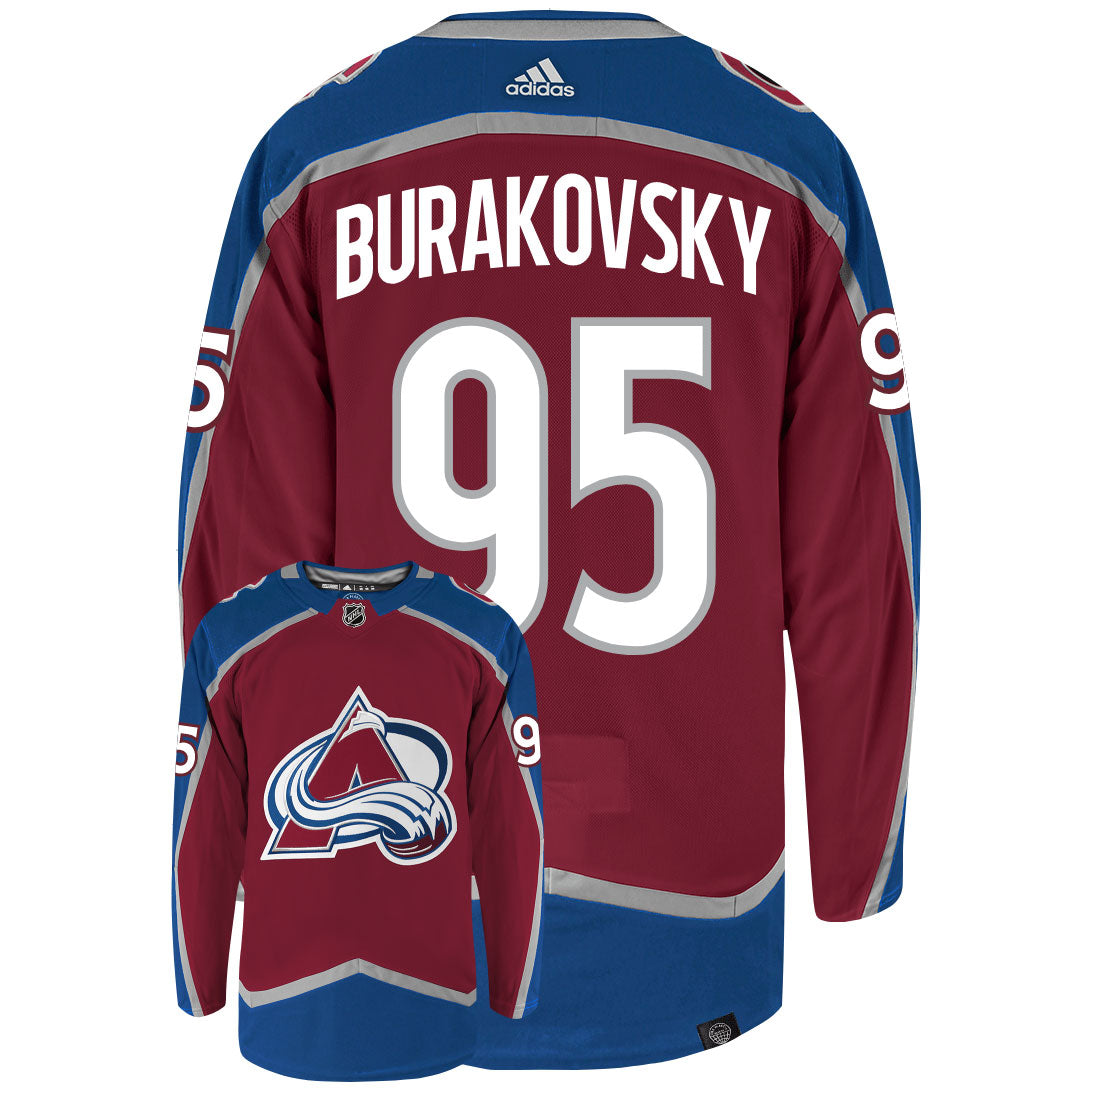 Andre Burakovsky Colorado Avalanche Adidas Primegreen Authentic Home NHL Hockey Jersey - Back/Front View